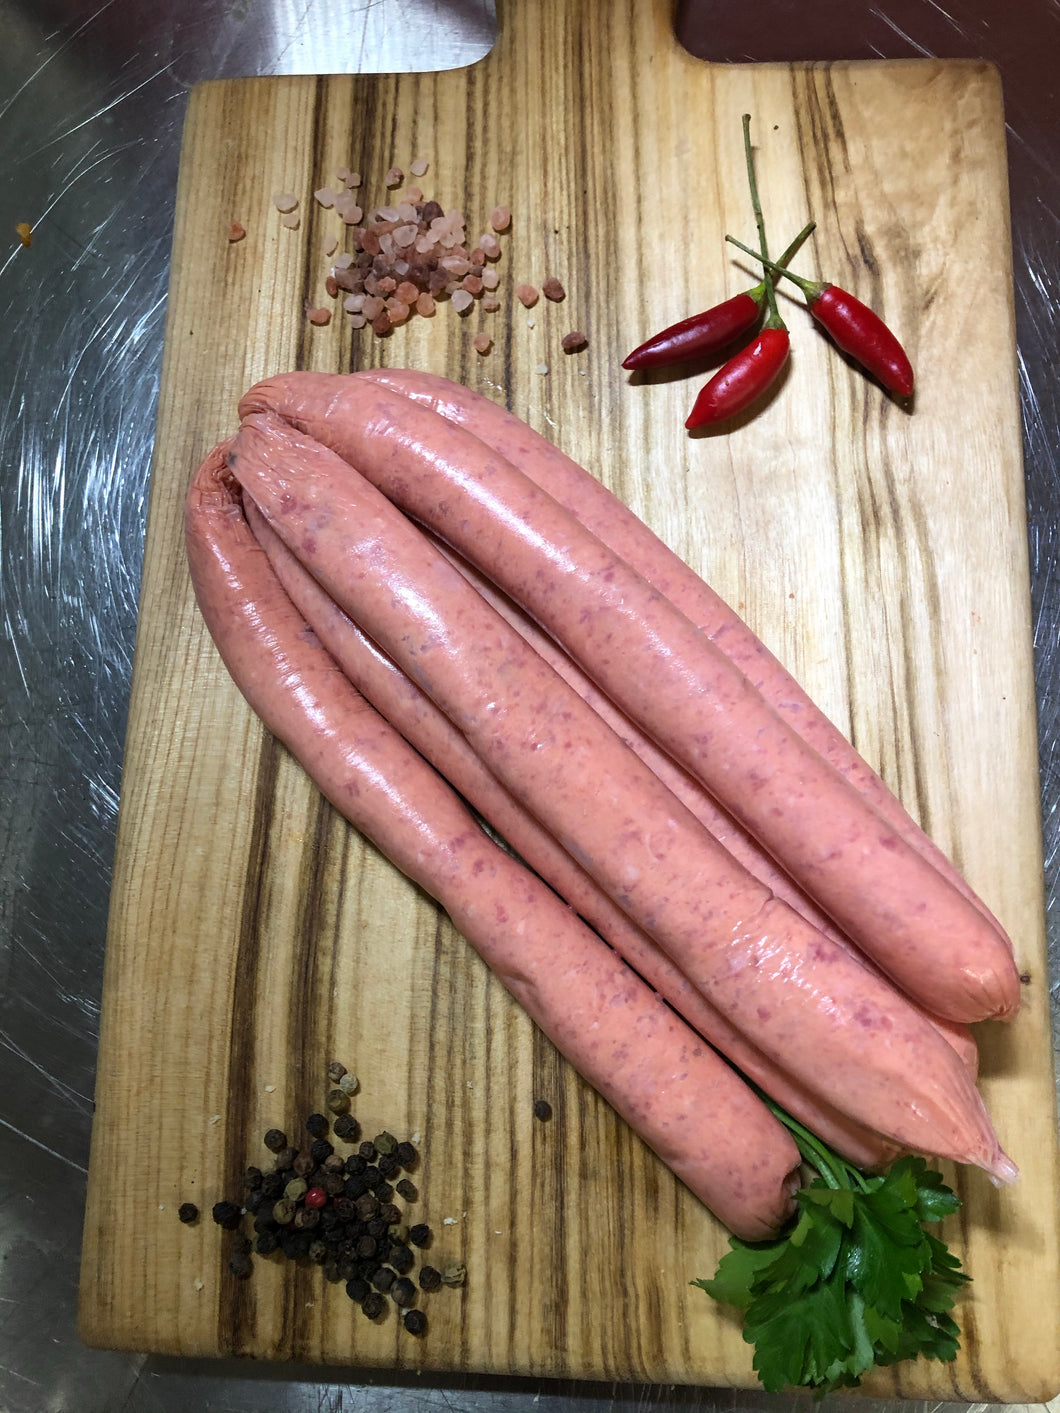 Thin Sausages